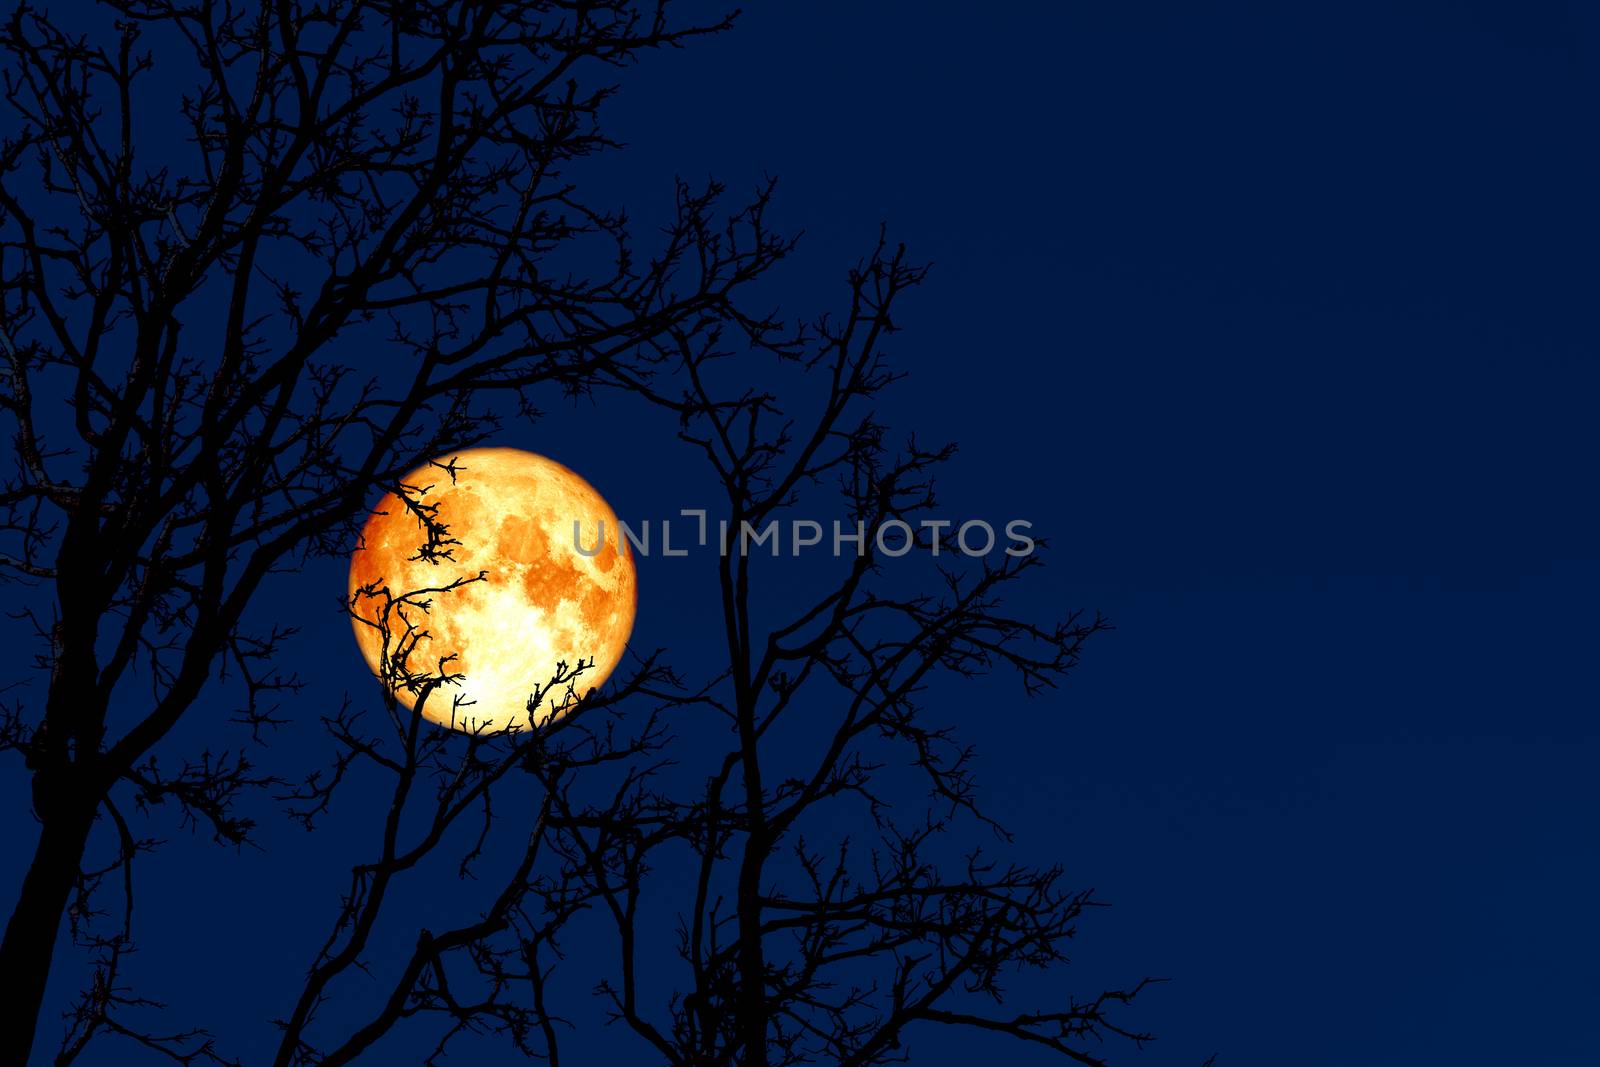 full worm moon back on silhouette plant and trees on night sky, Elements of this image furnished by NASA